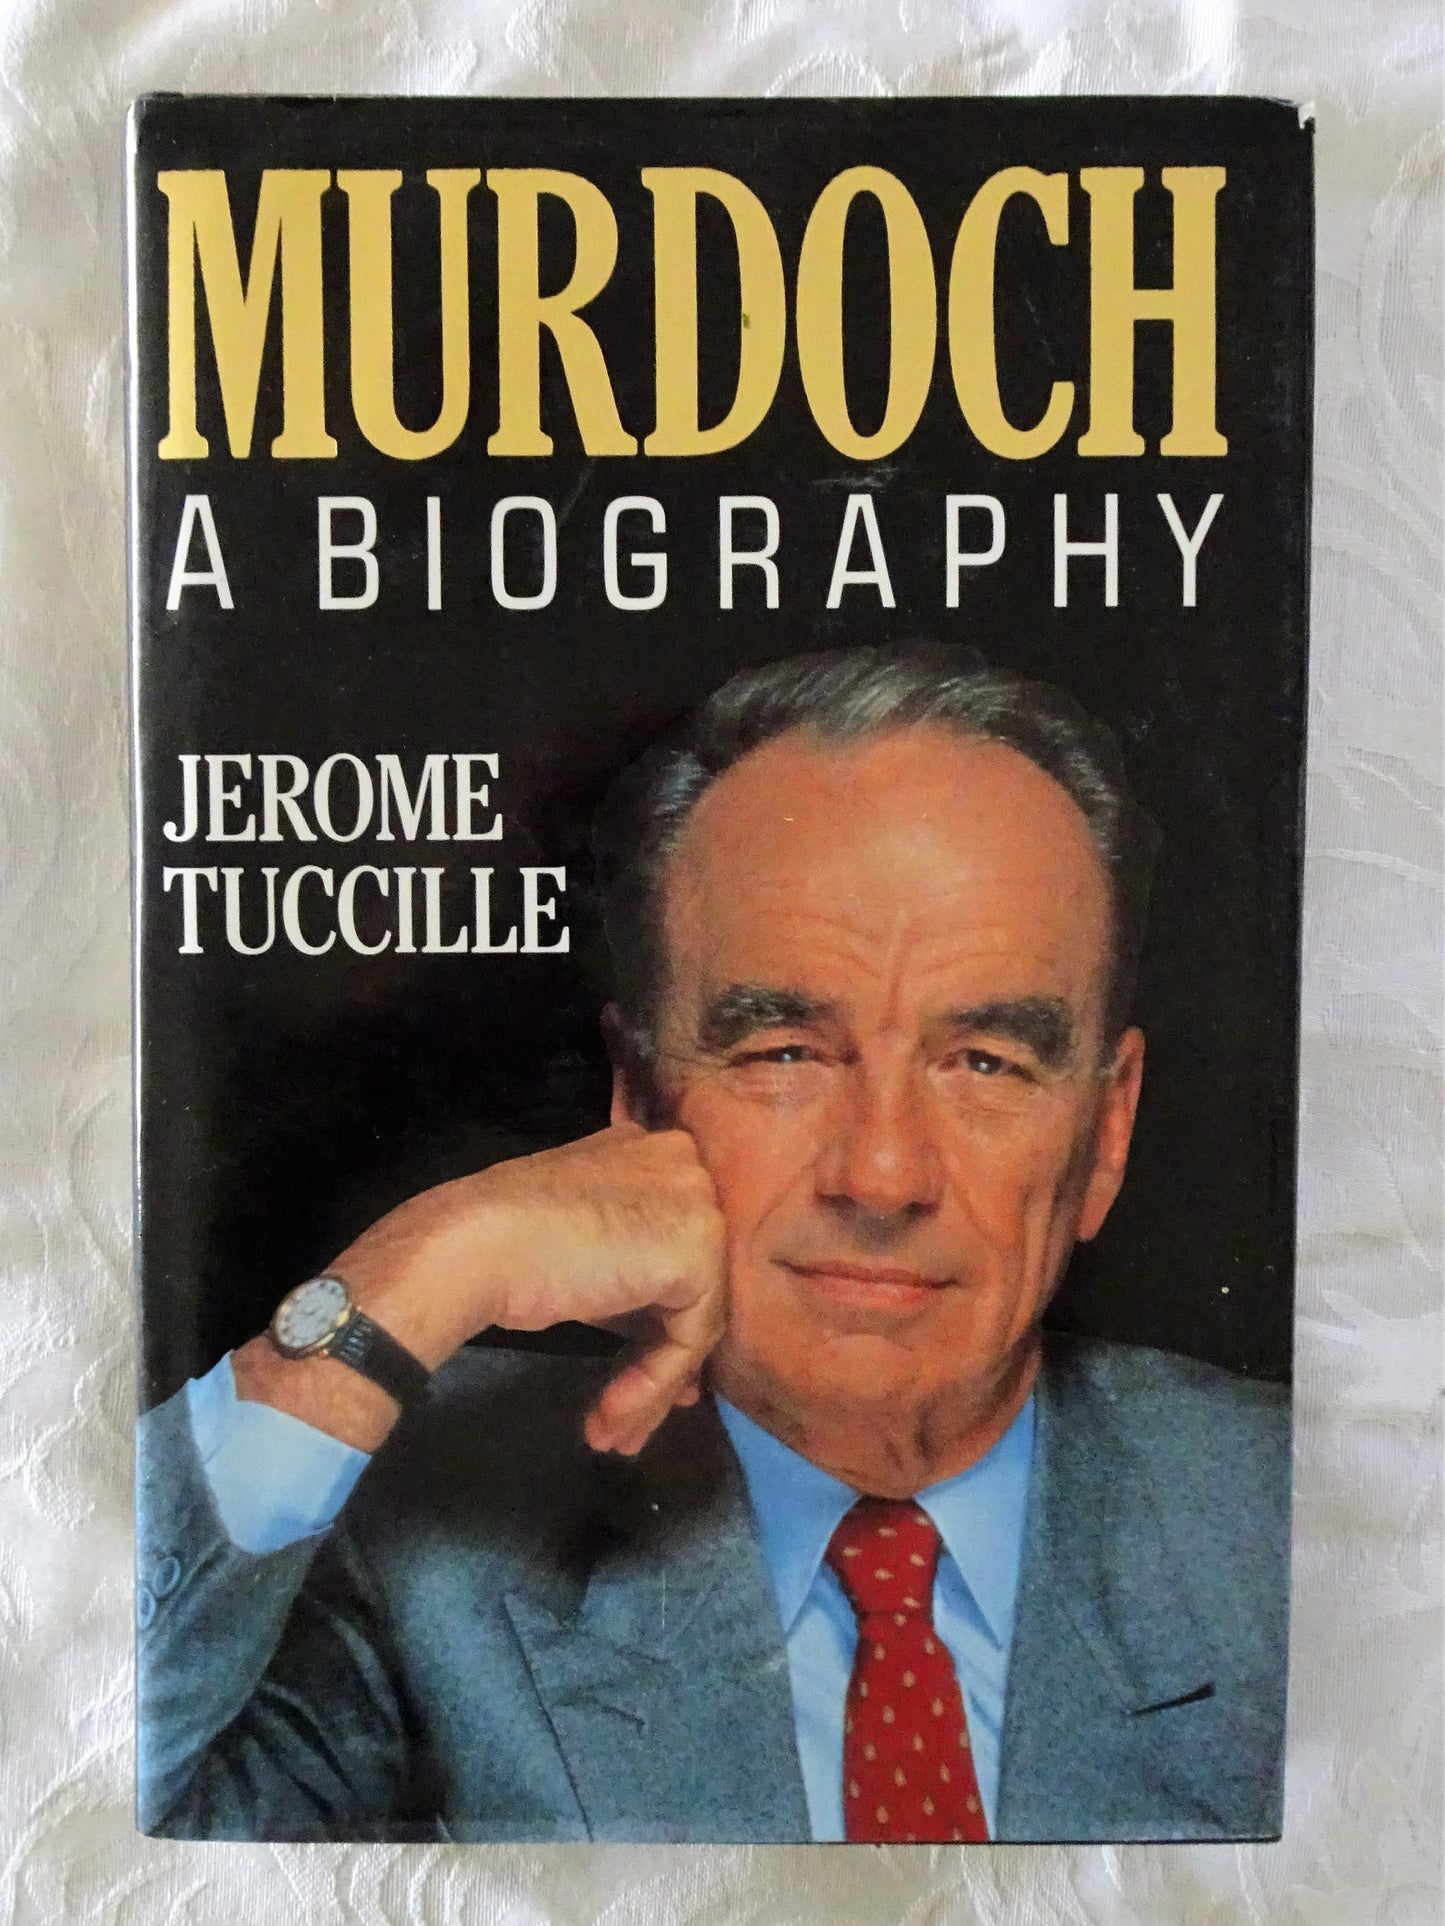 Murdoch A Biography by Jerome Tuccille